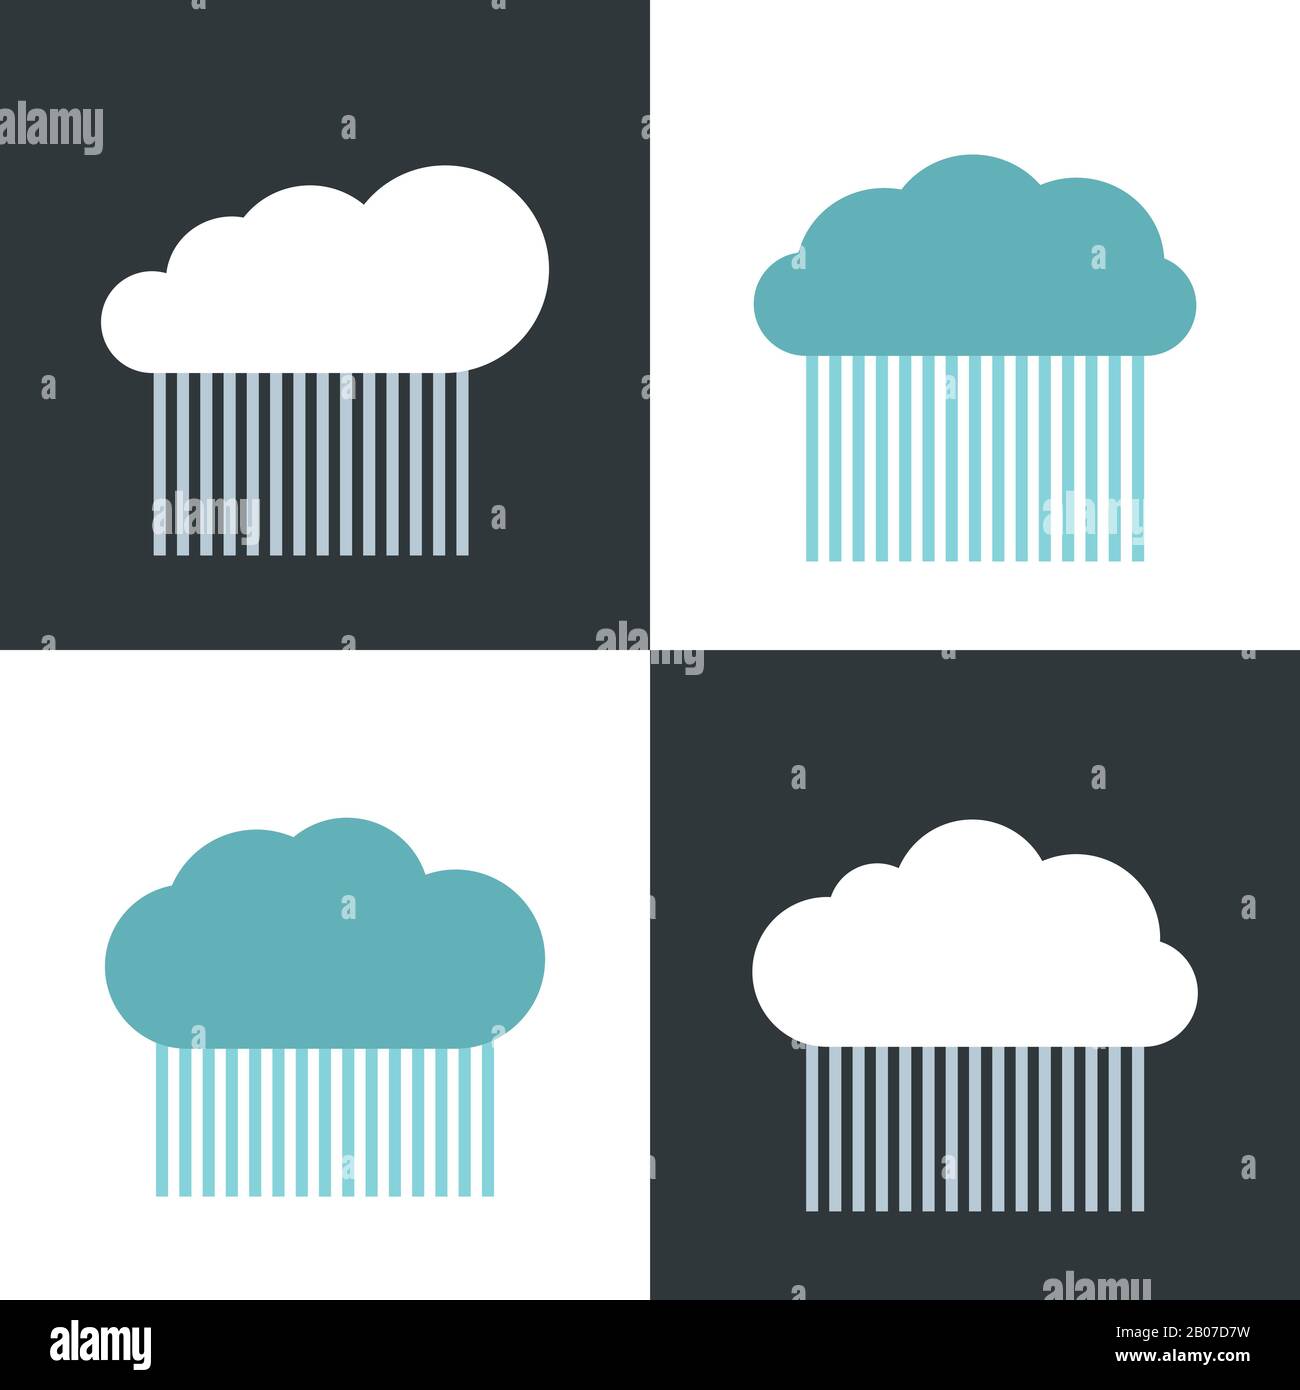 Flat cloud icons with rain on white and dark background. Storm rain icon, vector illustration Stock Vector